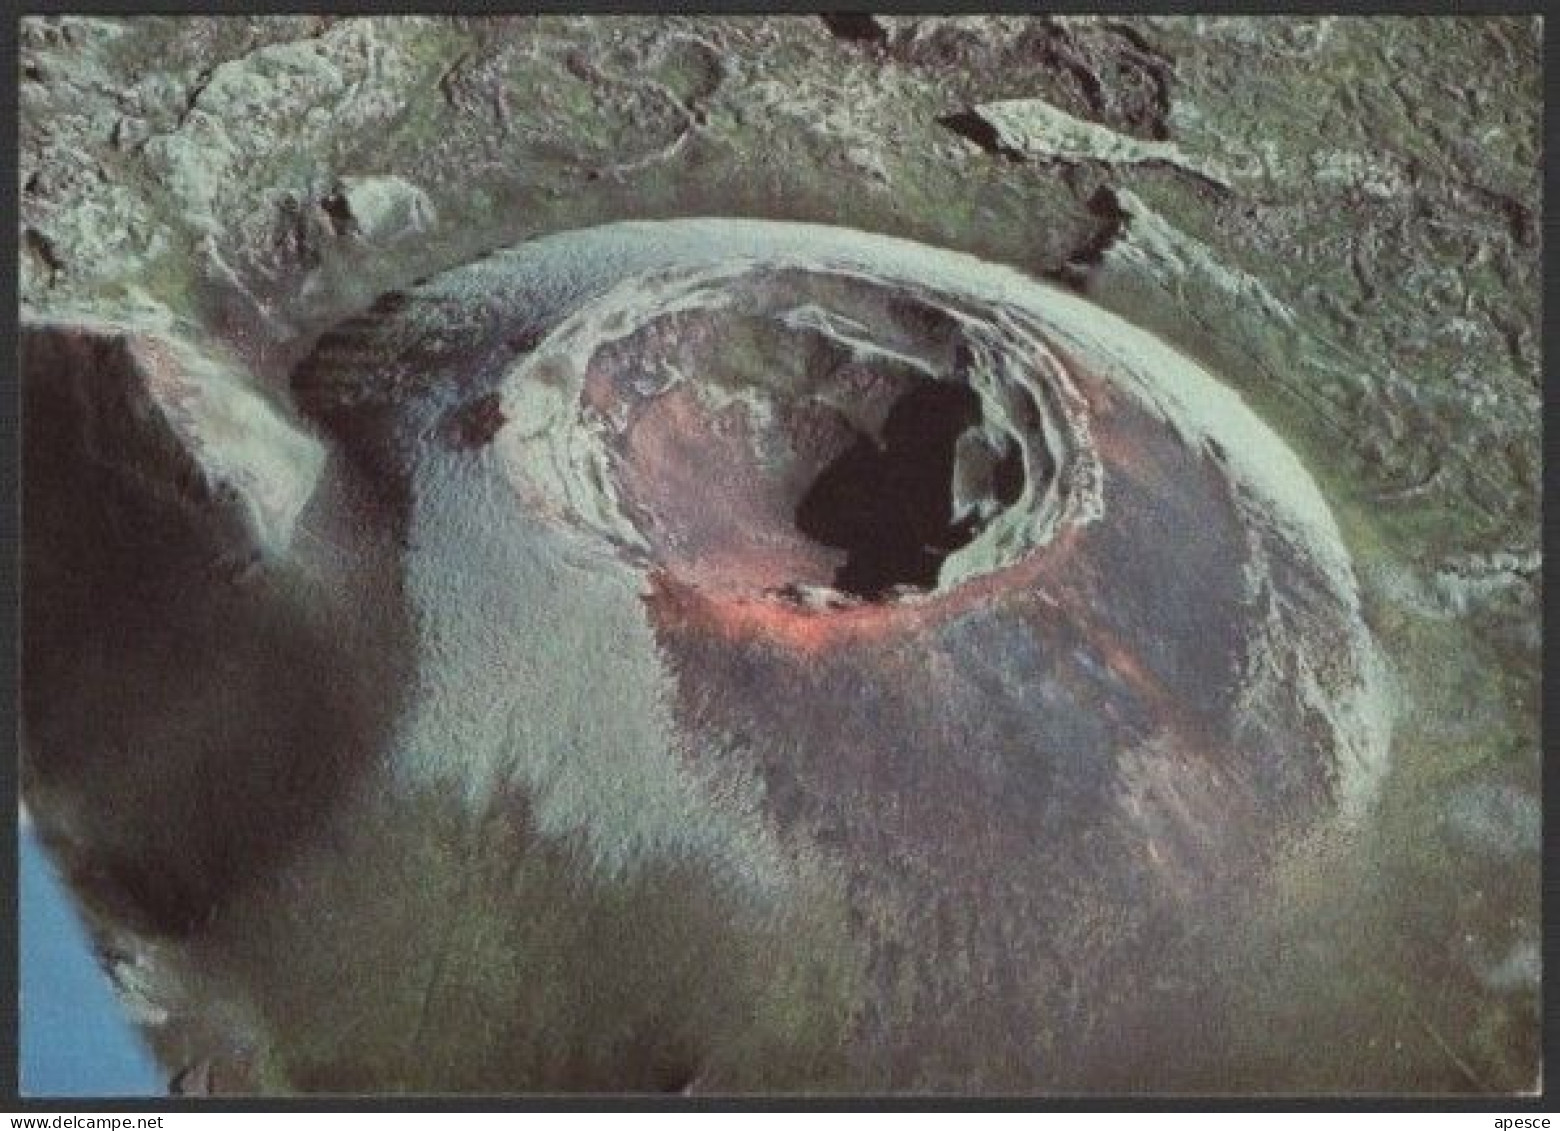 ICELAND - ONE OF THE 115 CRATERS OF THE INFAMOUS LAKI FISSURE ERUPTION 1783 - MINT - I - Iceland